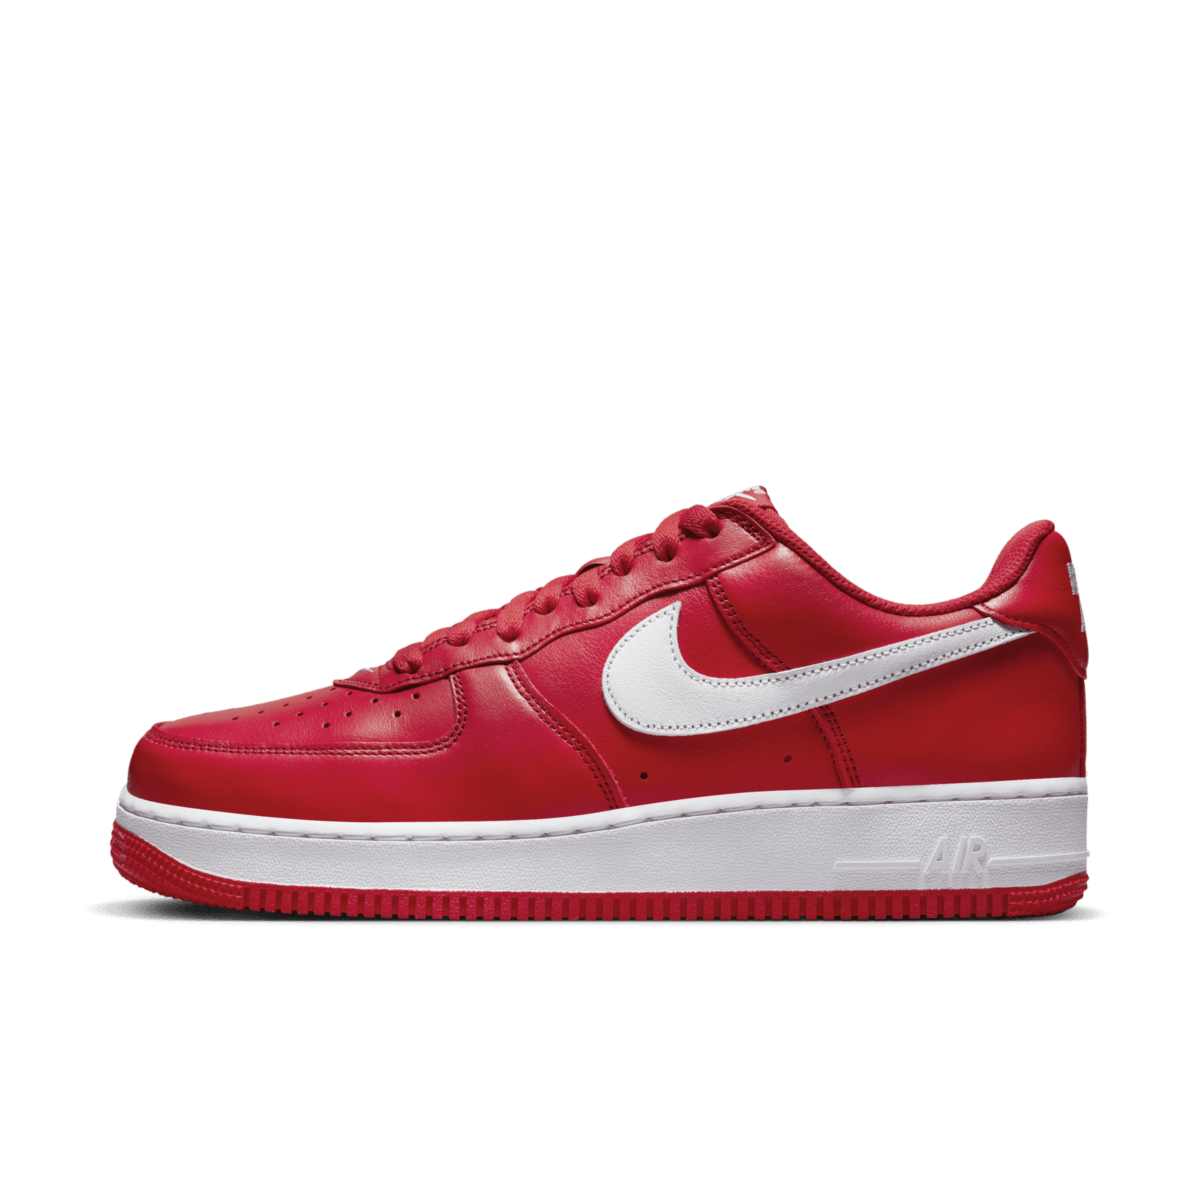 Air Force 1 "University Red"